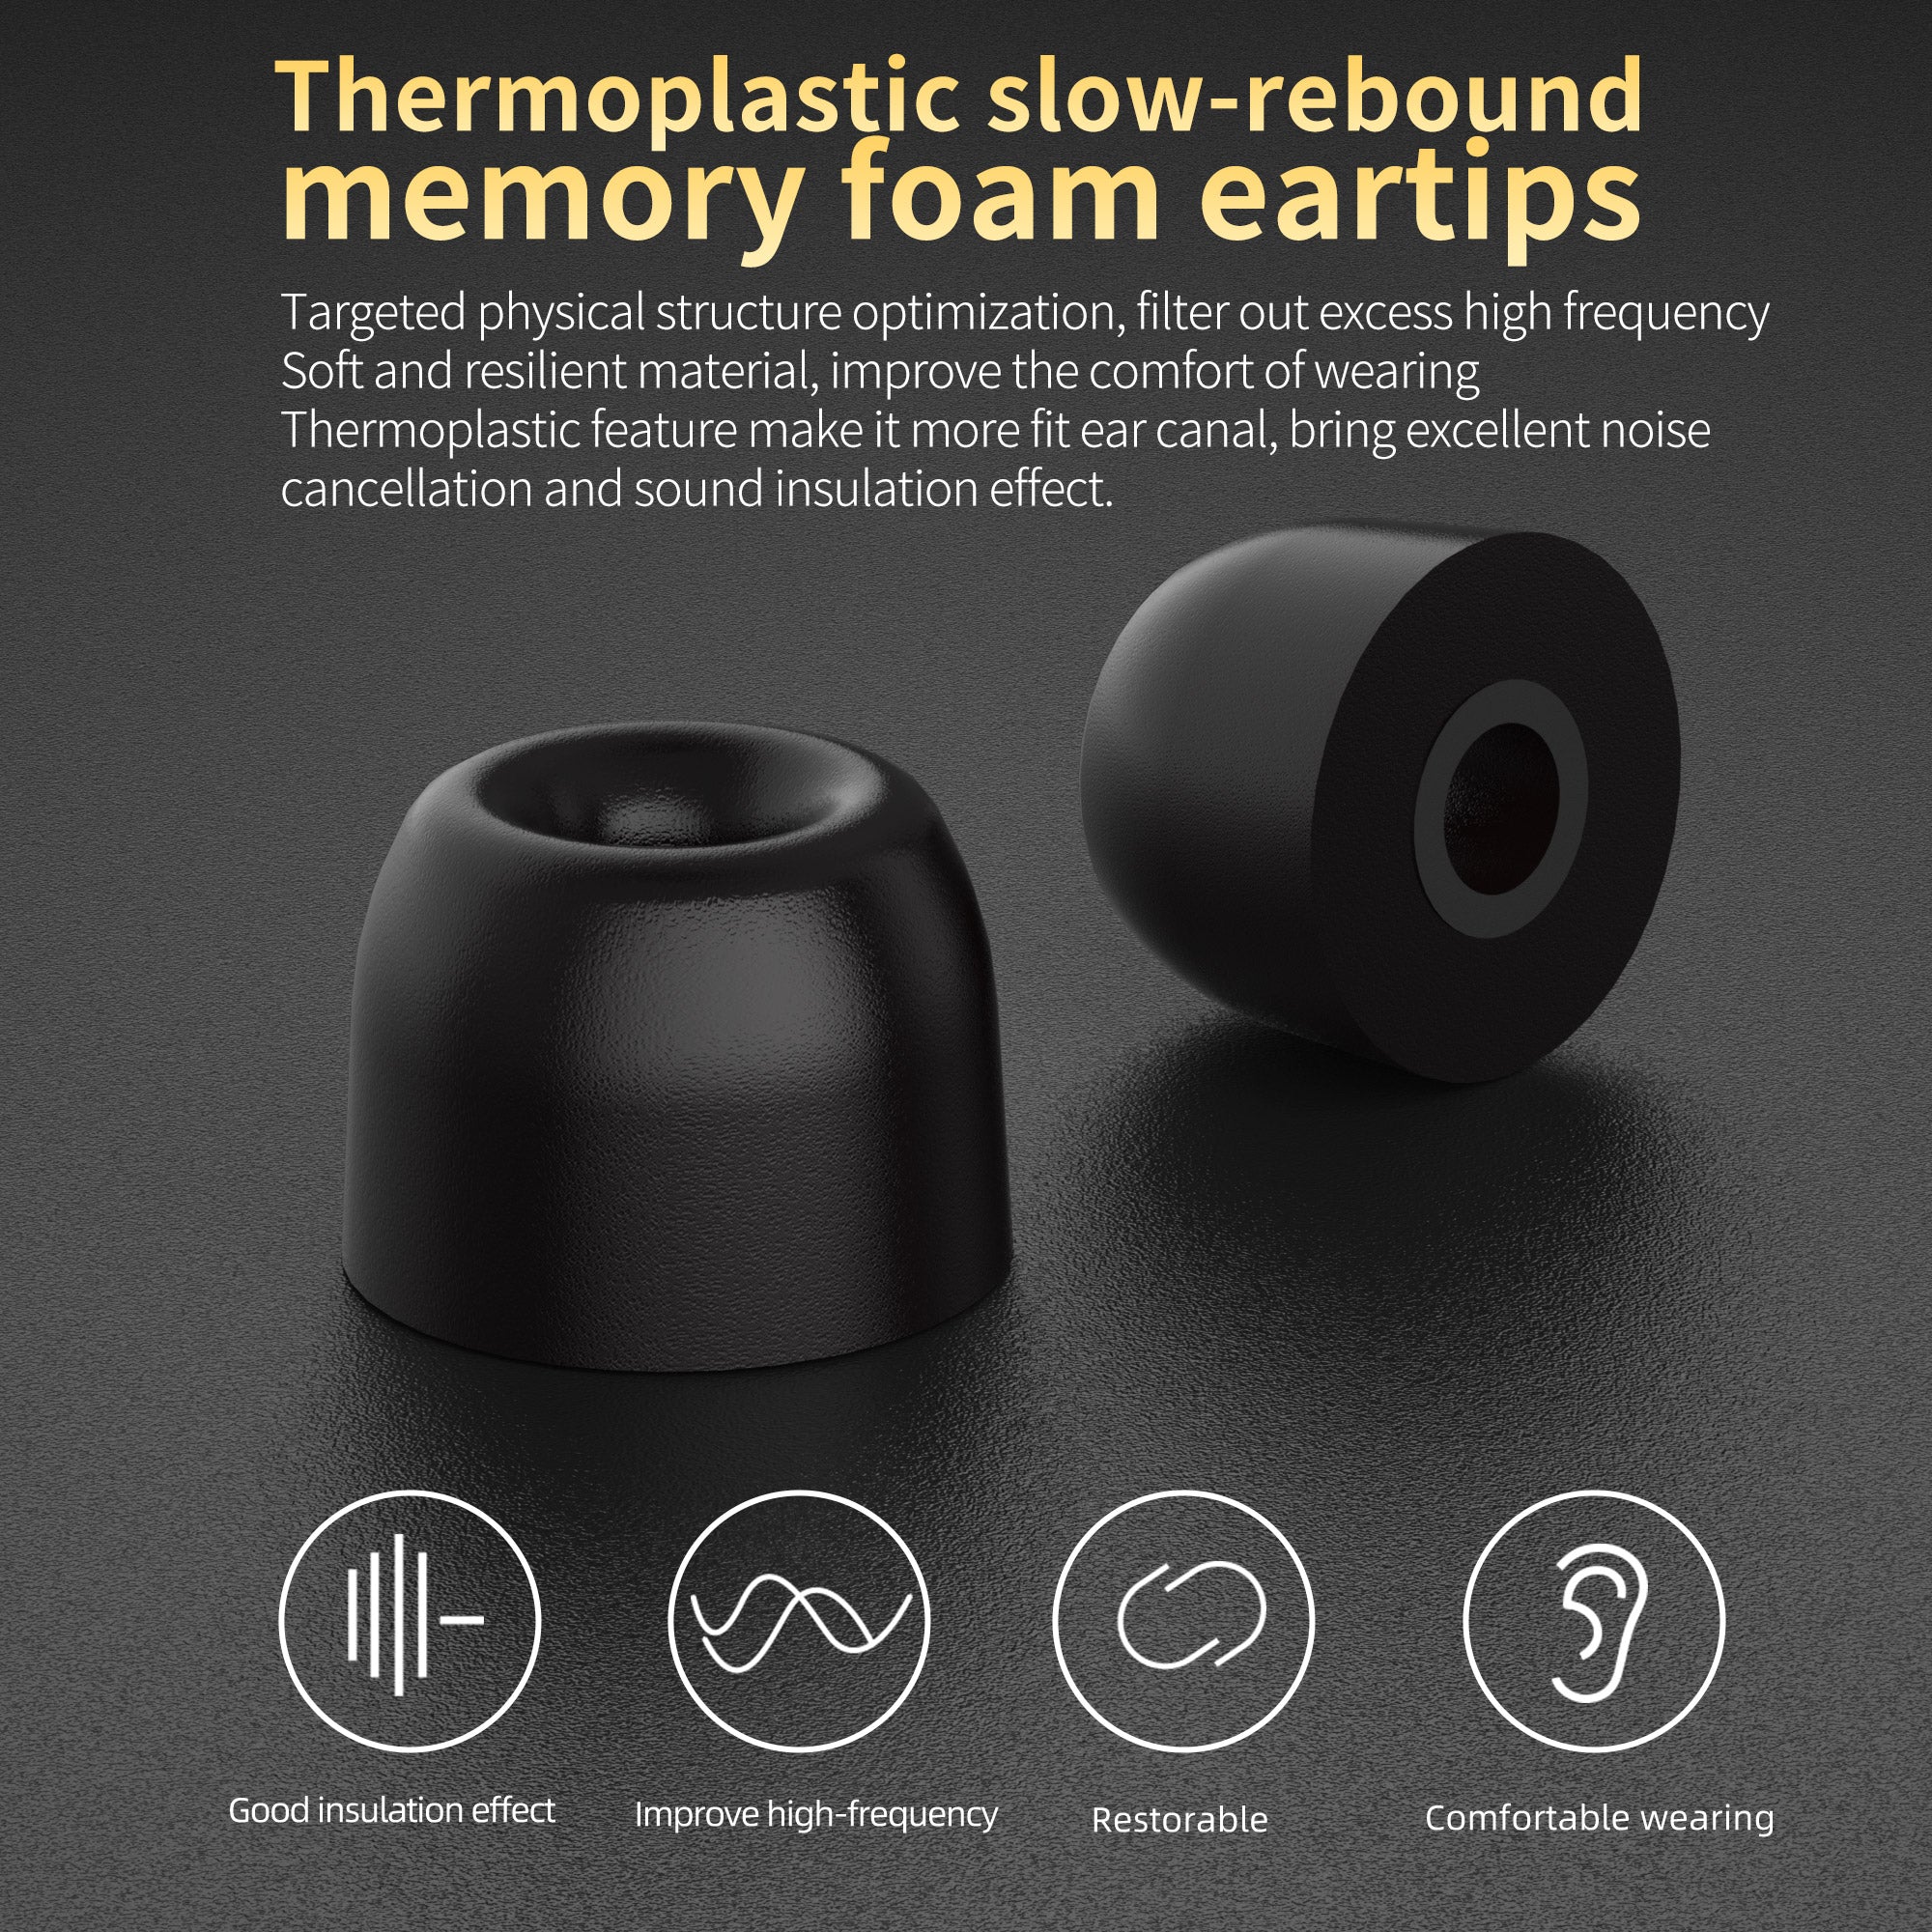 The slow rebound memory foam ear tips effectively block external sound and provide a soft and comfortable fit that conforms to the ear canal. They are designed with ergonomic considerations in mind and are accompanied by three sizes of silicone ear tips (S, M, L) to accommodate different ear shapes.